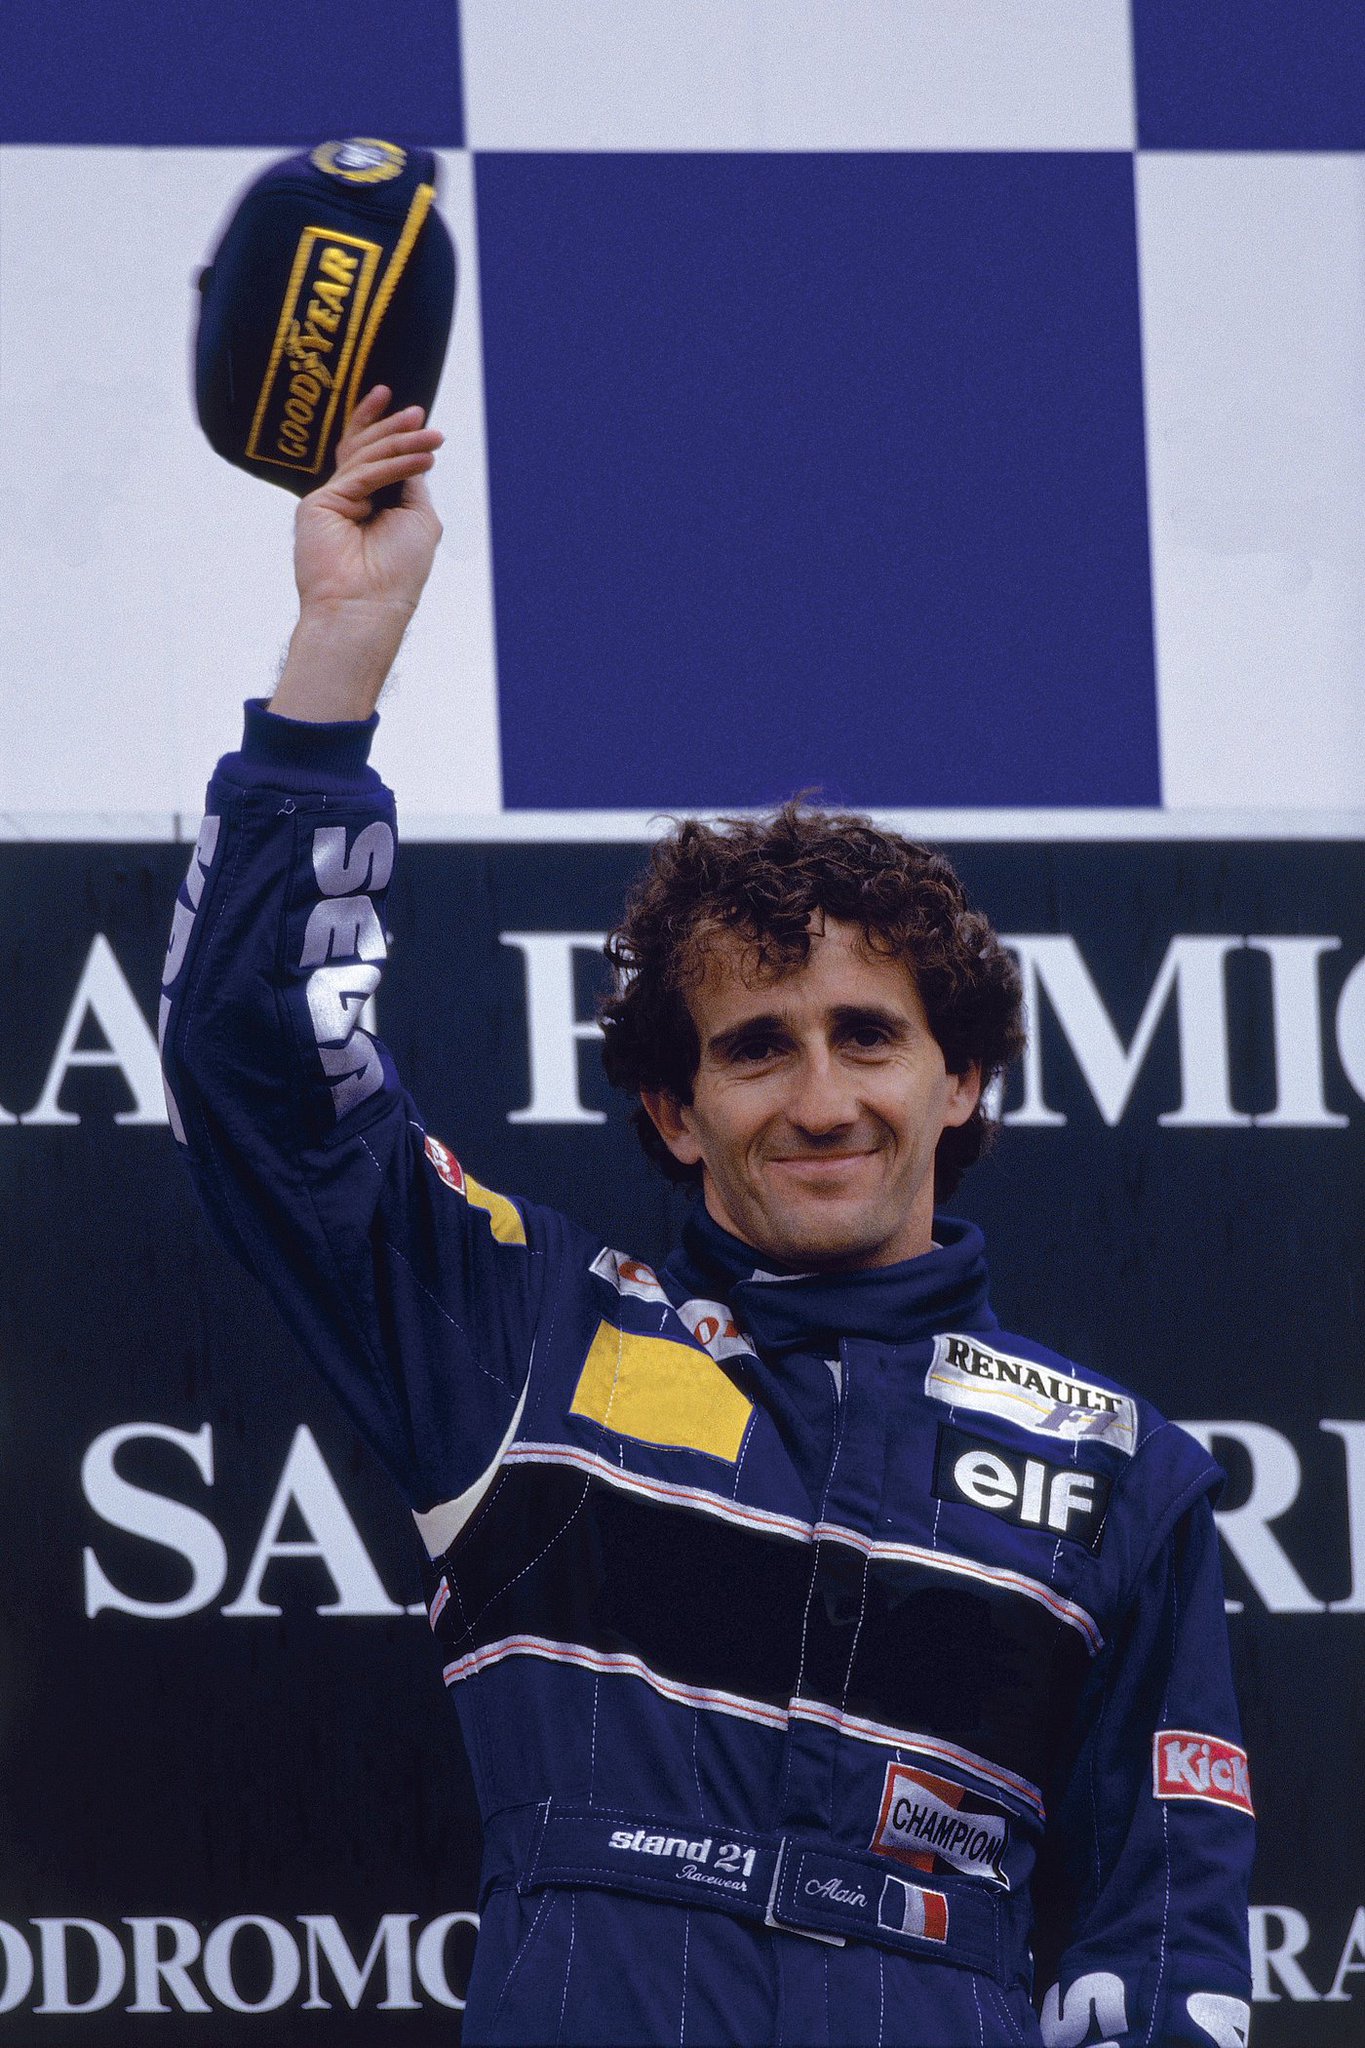 Join us and wish happy birthday to F1 legend and former ELF driver Alain Prost. 